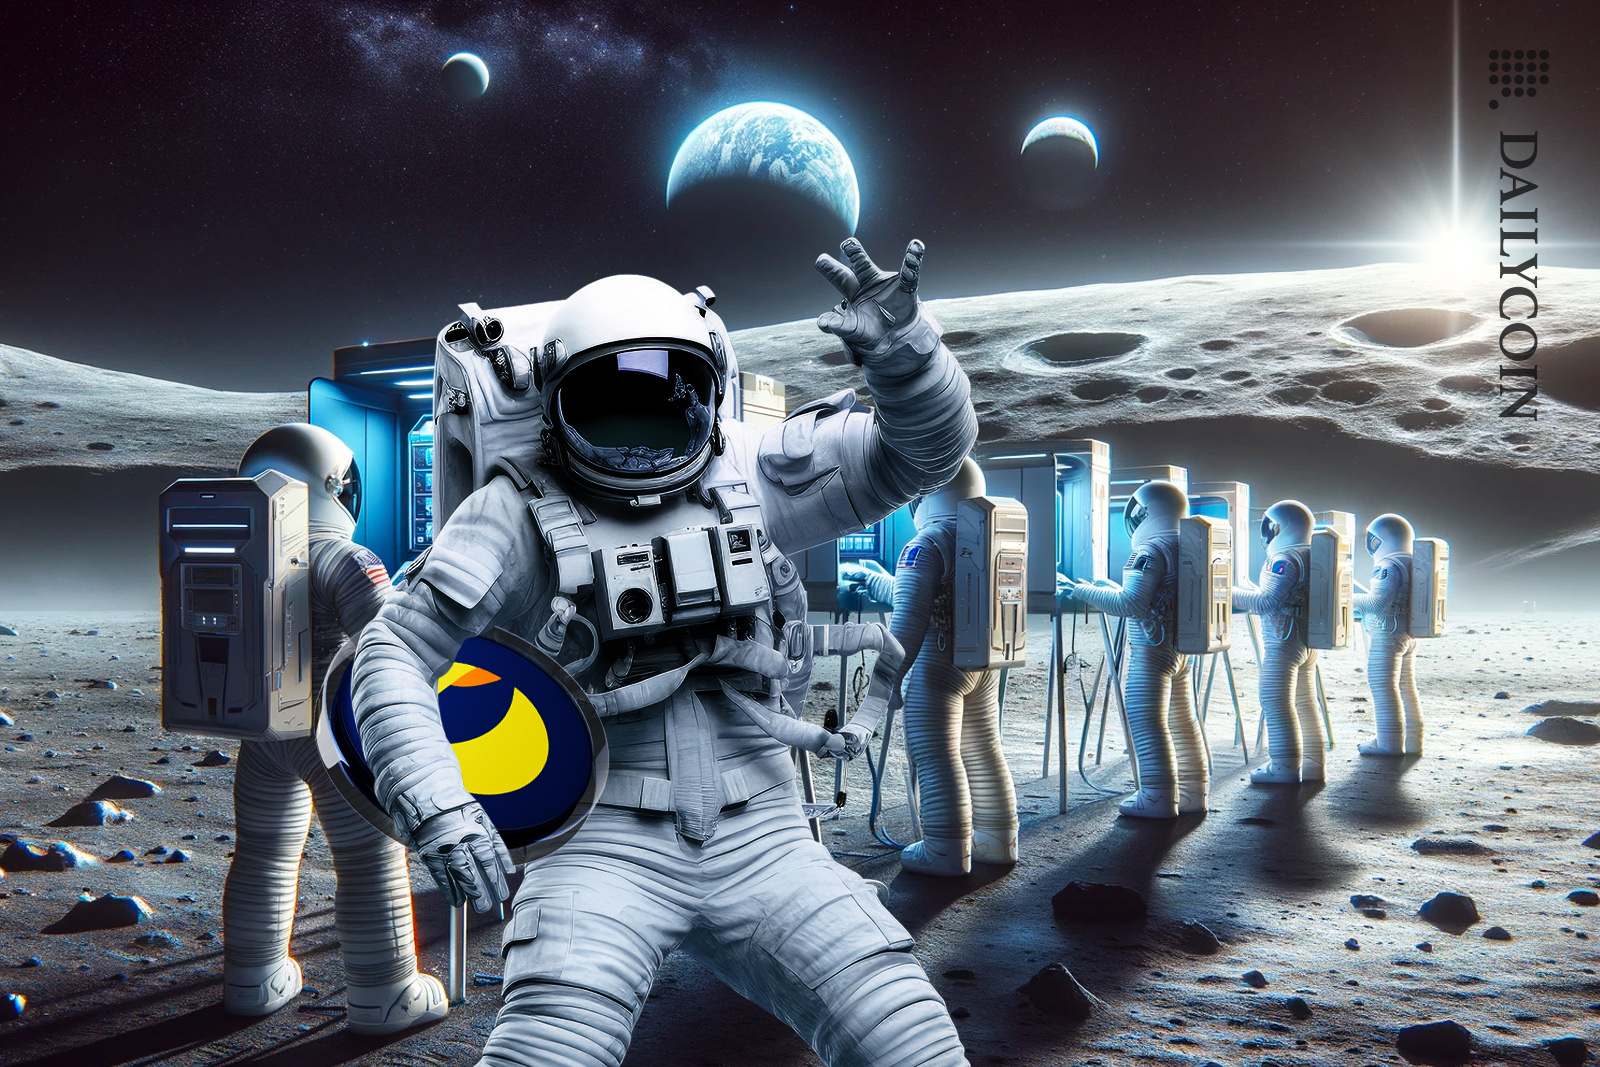 Astronaut waving hello with LUNC coin as fellow astraunauts are casting their vote.